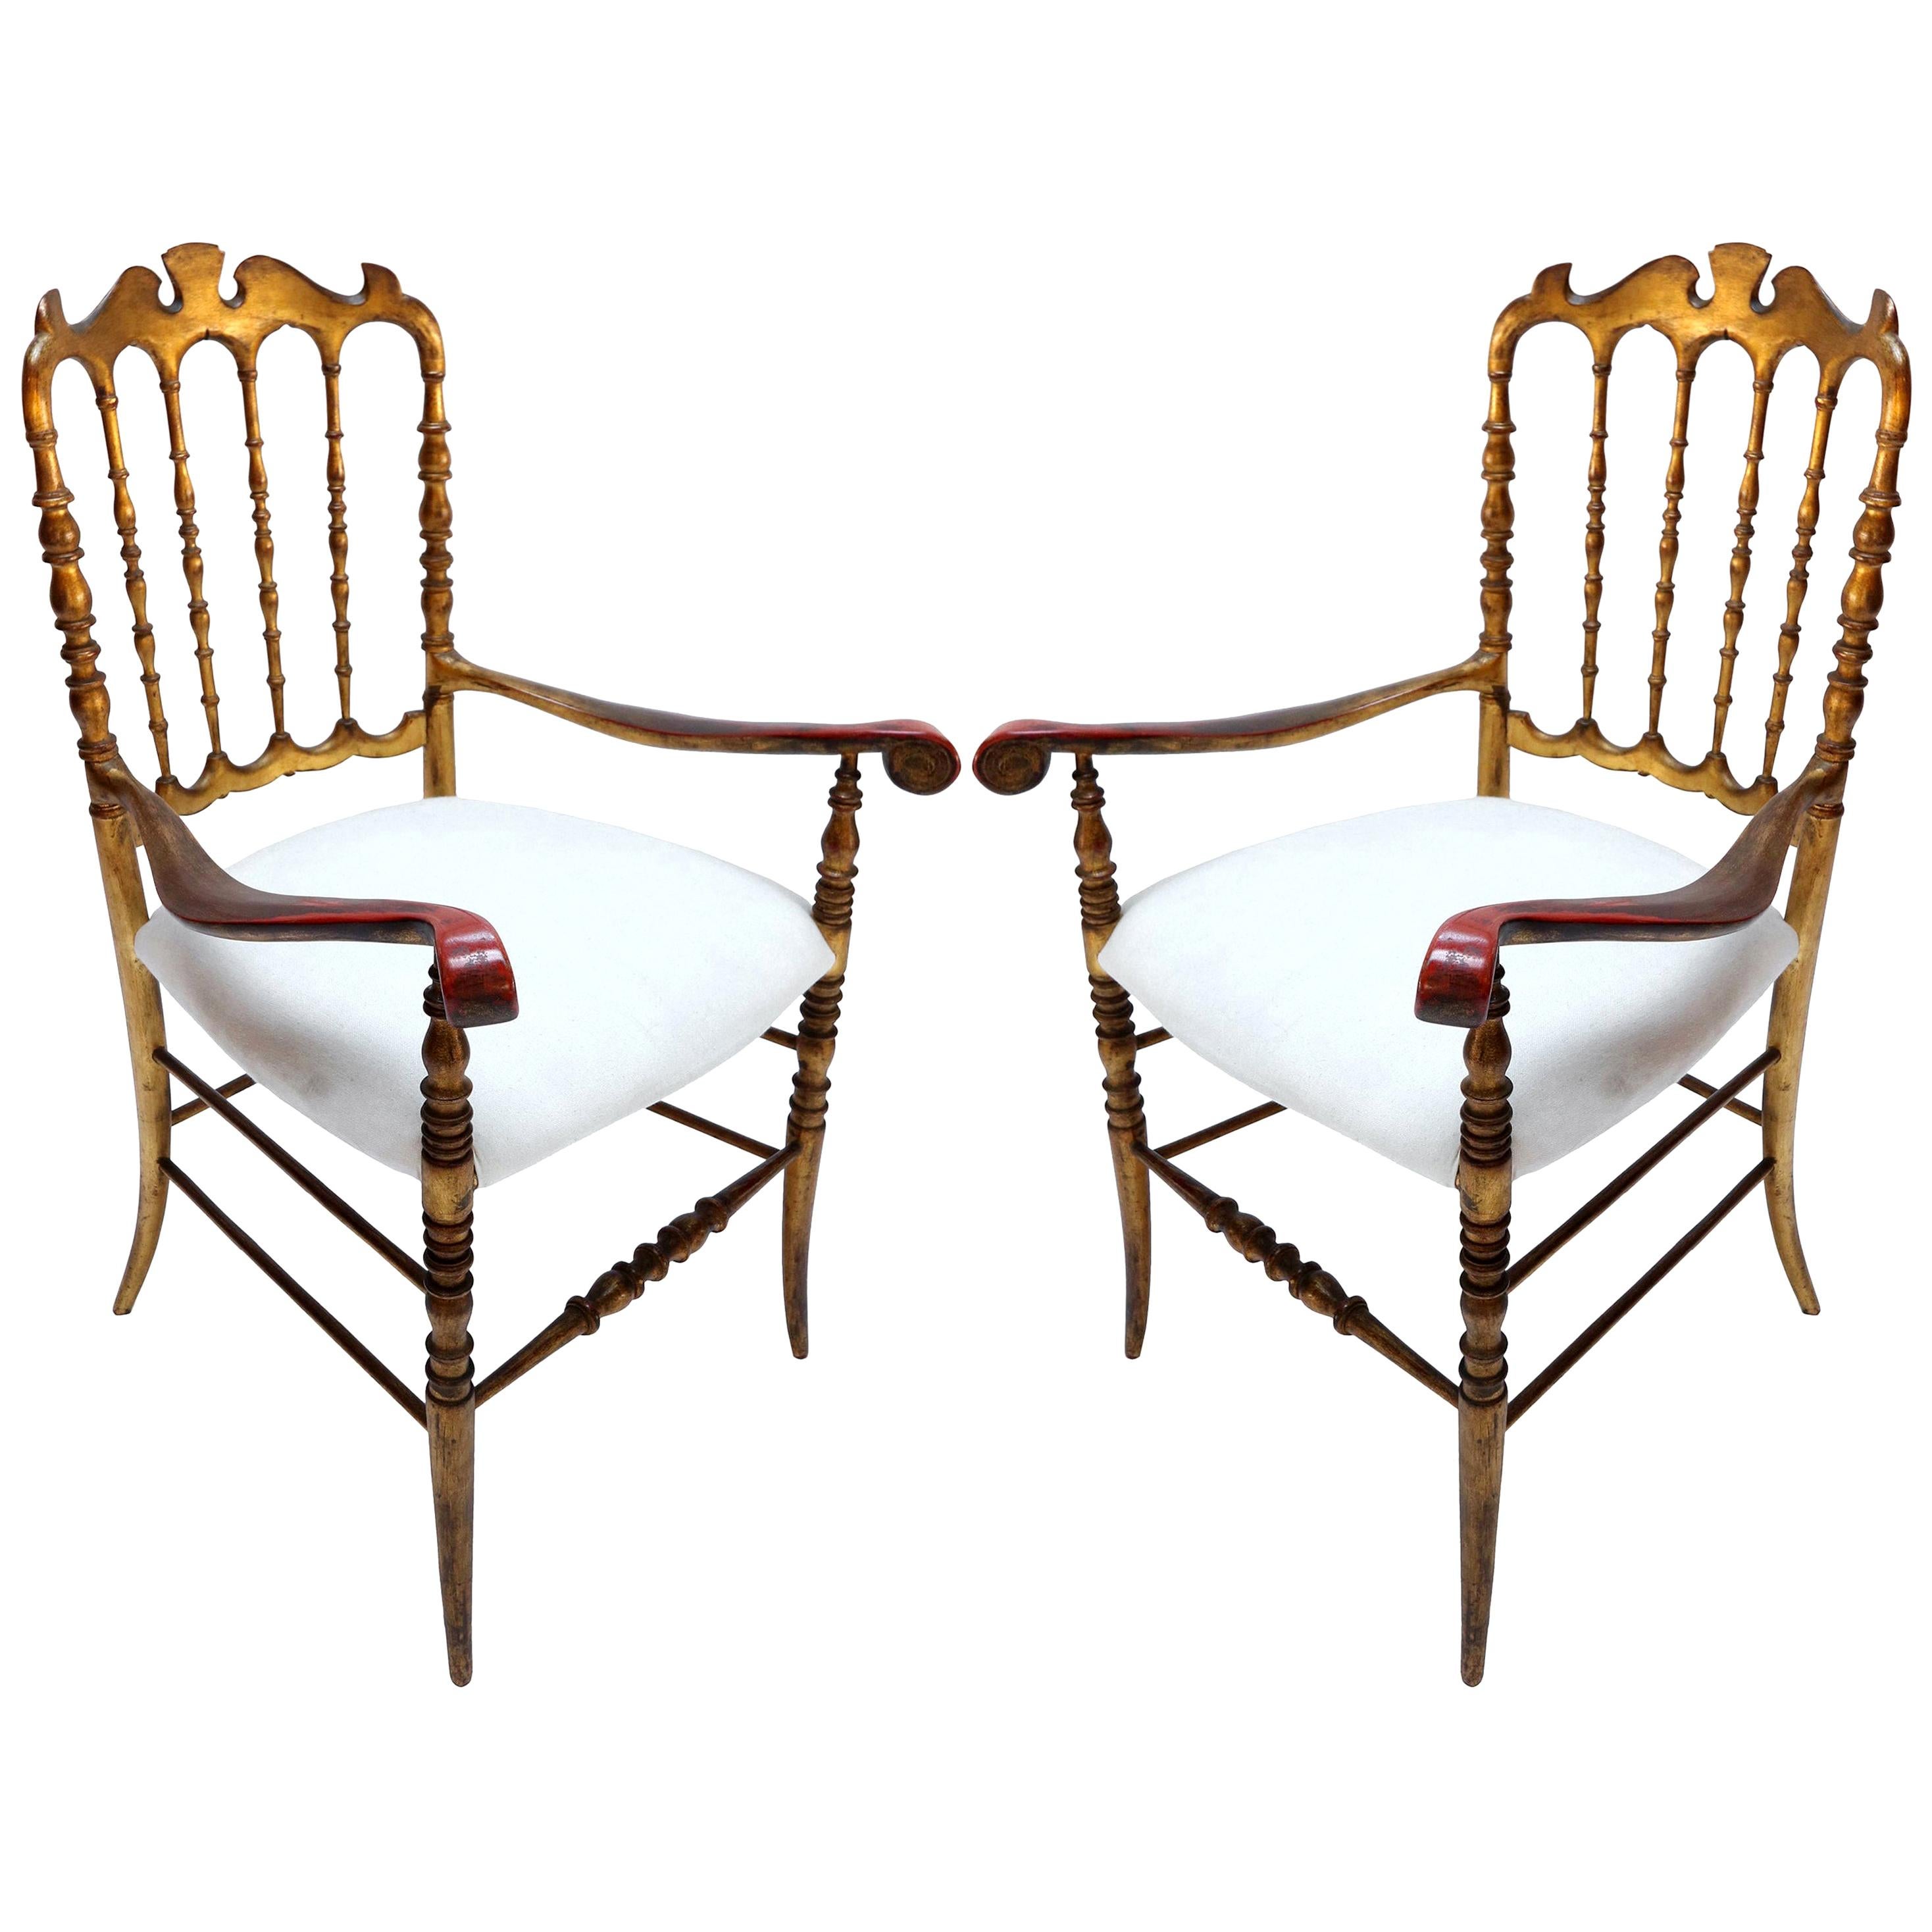 Pair of 1950s Gilded Wood Chiavari Chairs with Ivory Seats